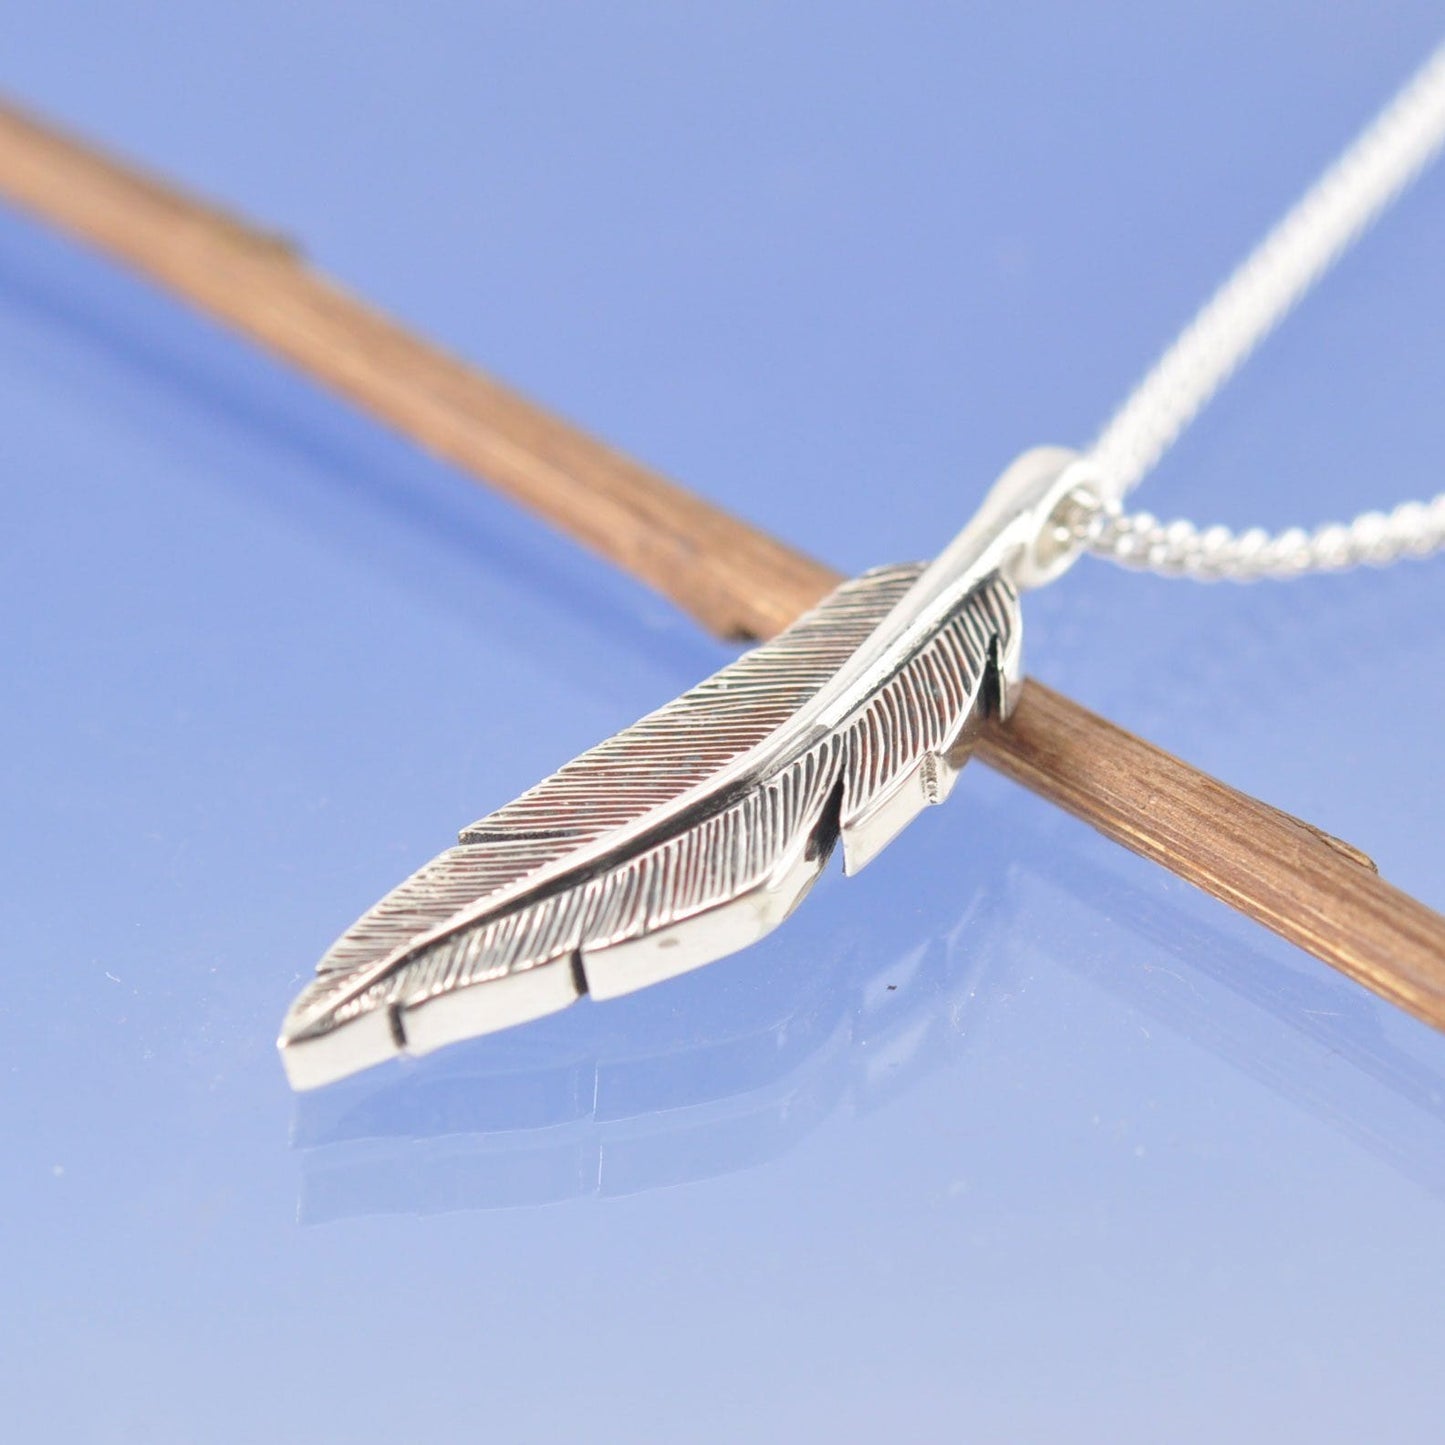 Feather Cremation Ashes Necklace. Pendant by Chris Parry Jewellery